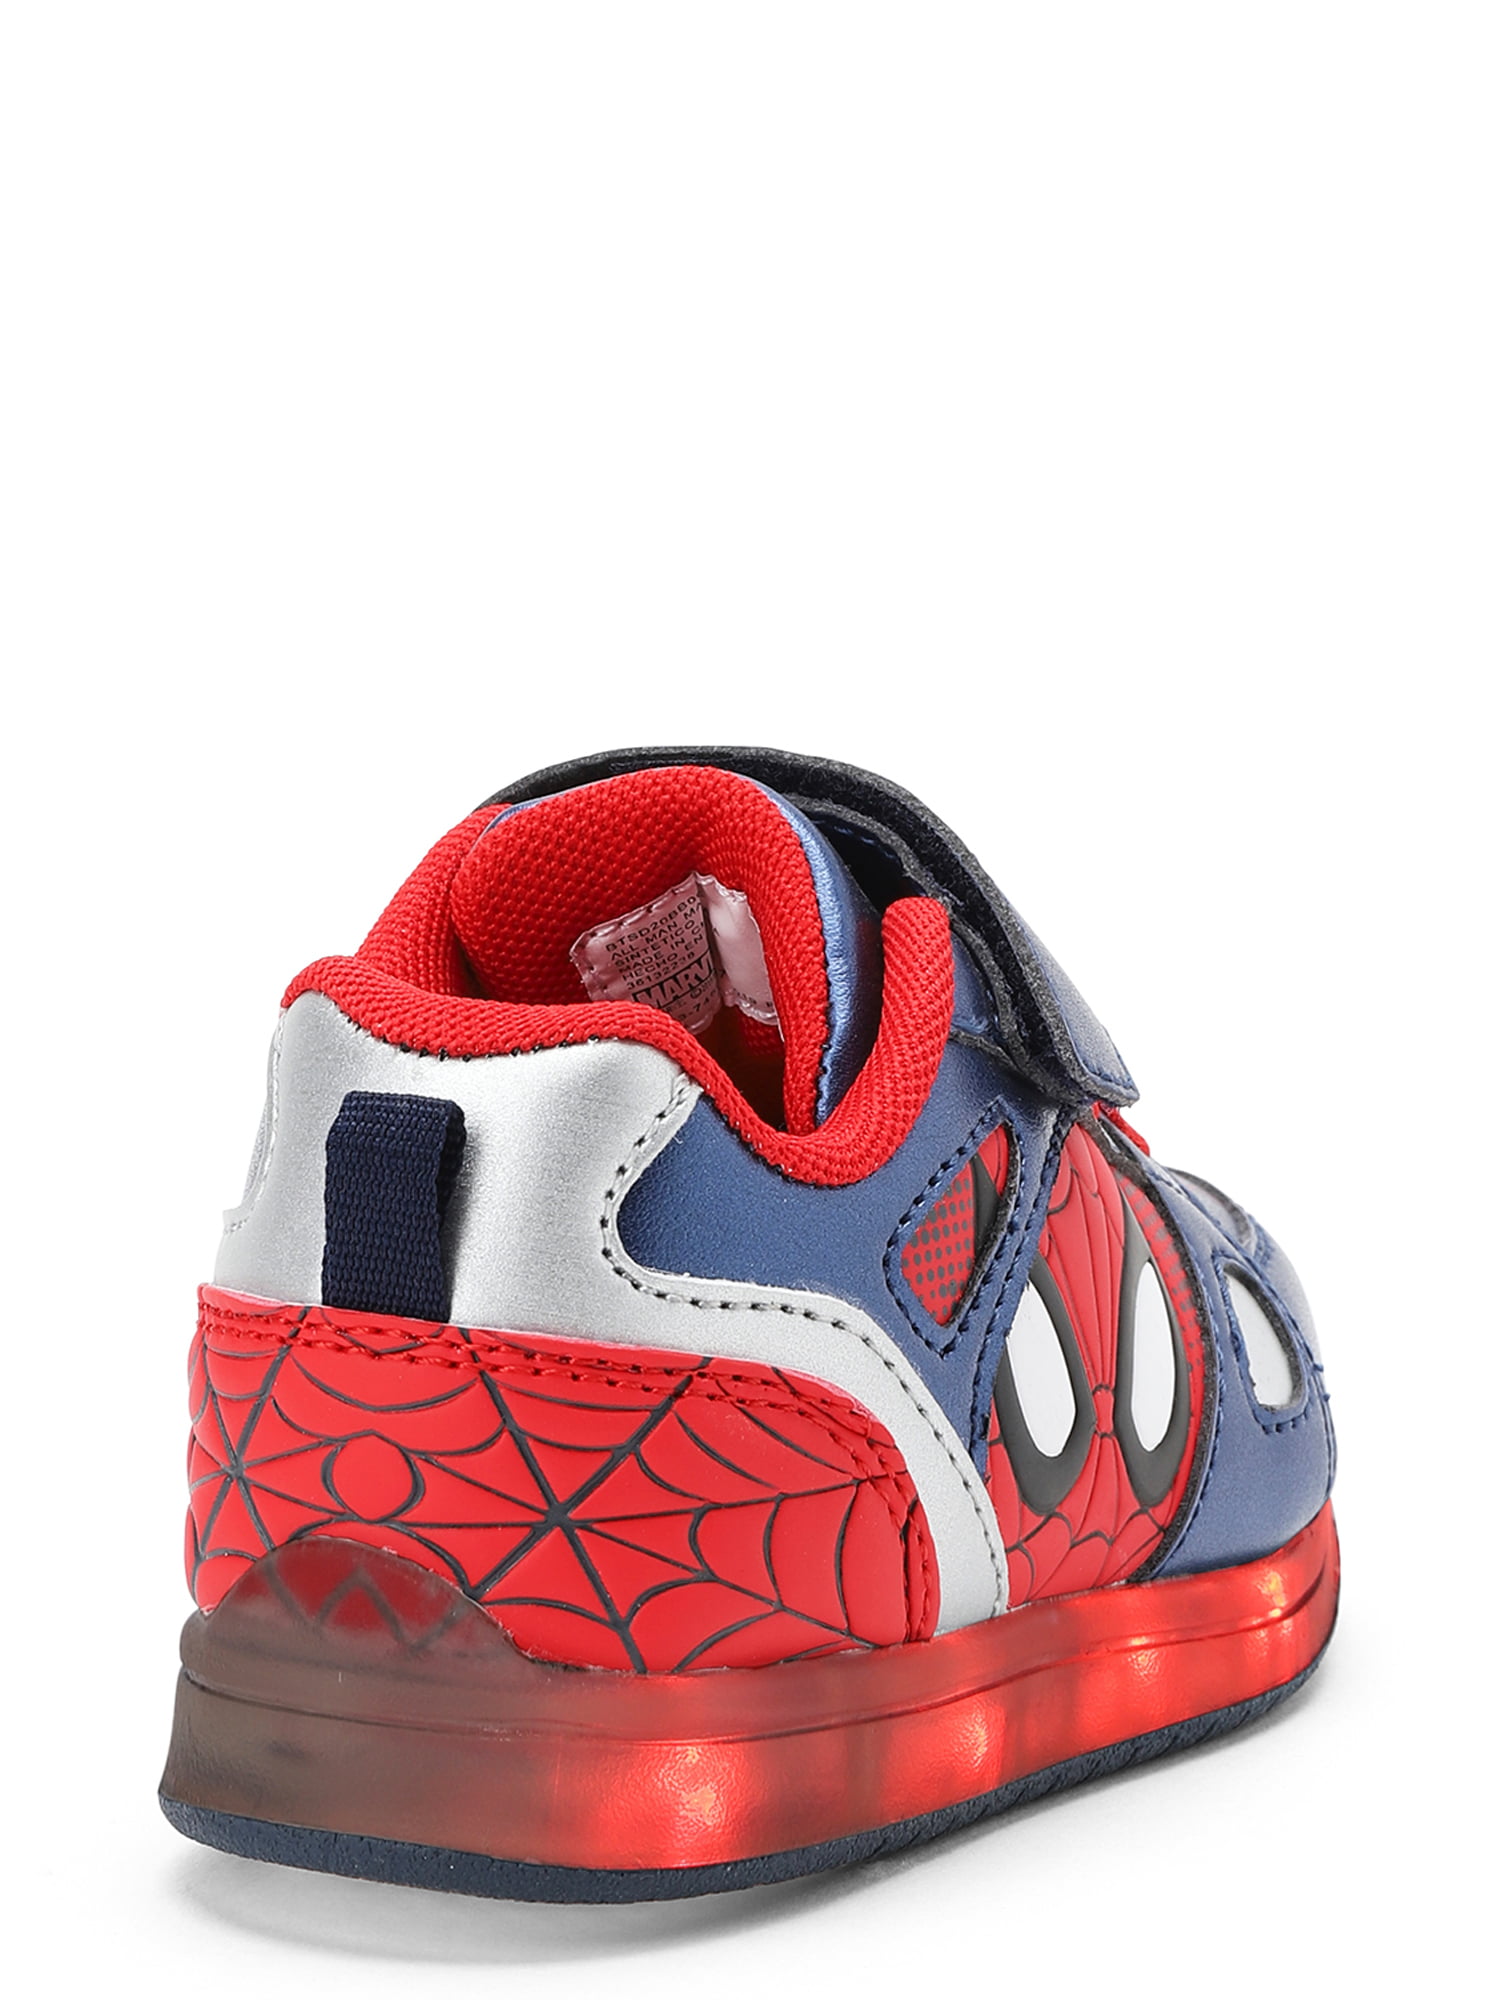 spiderman light up shoes size 13